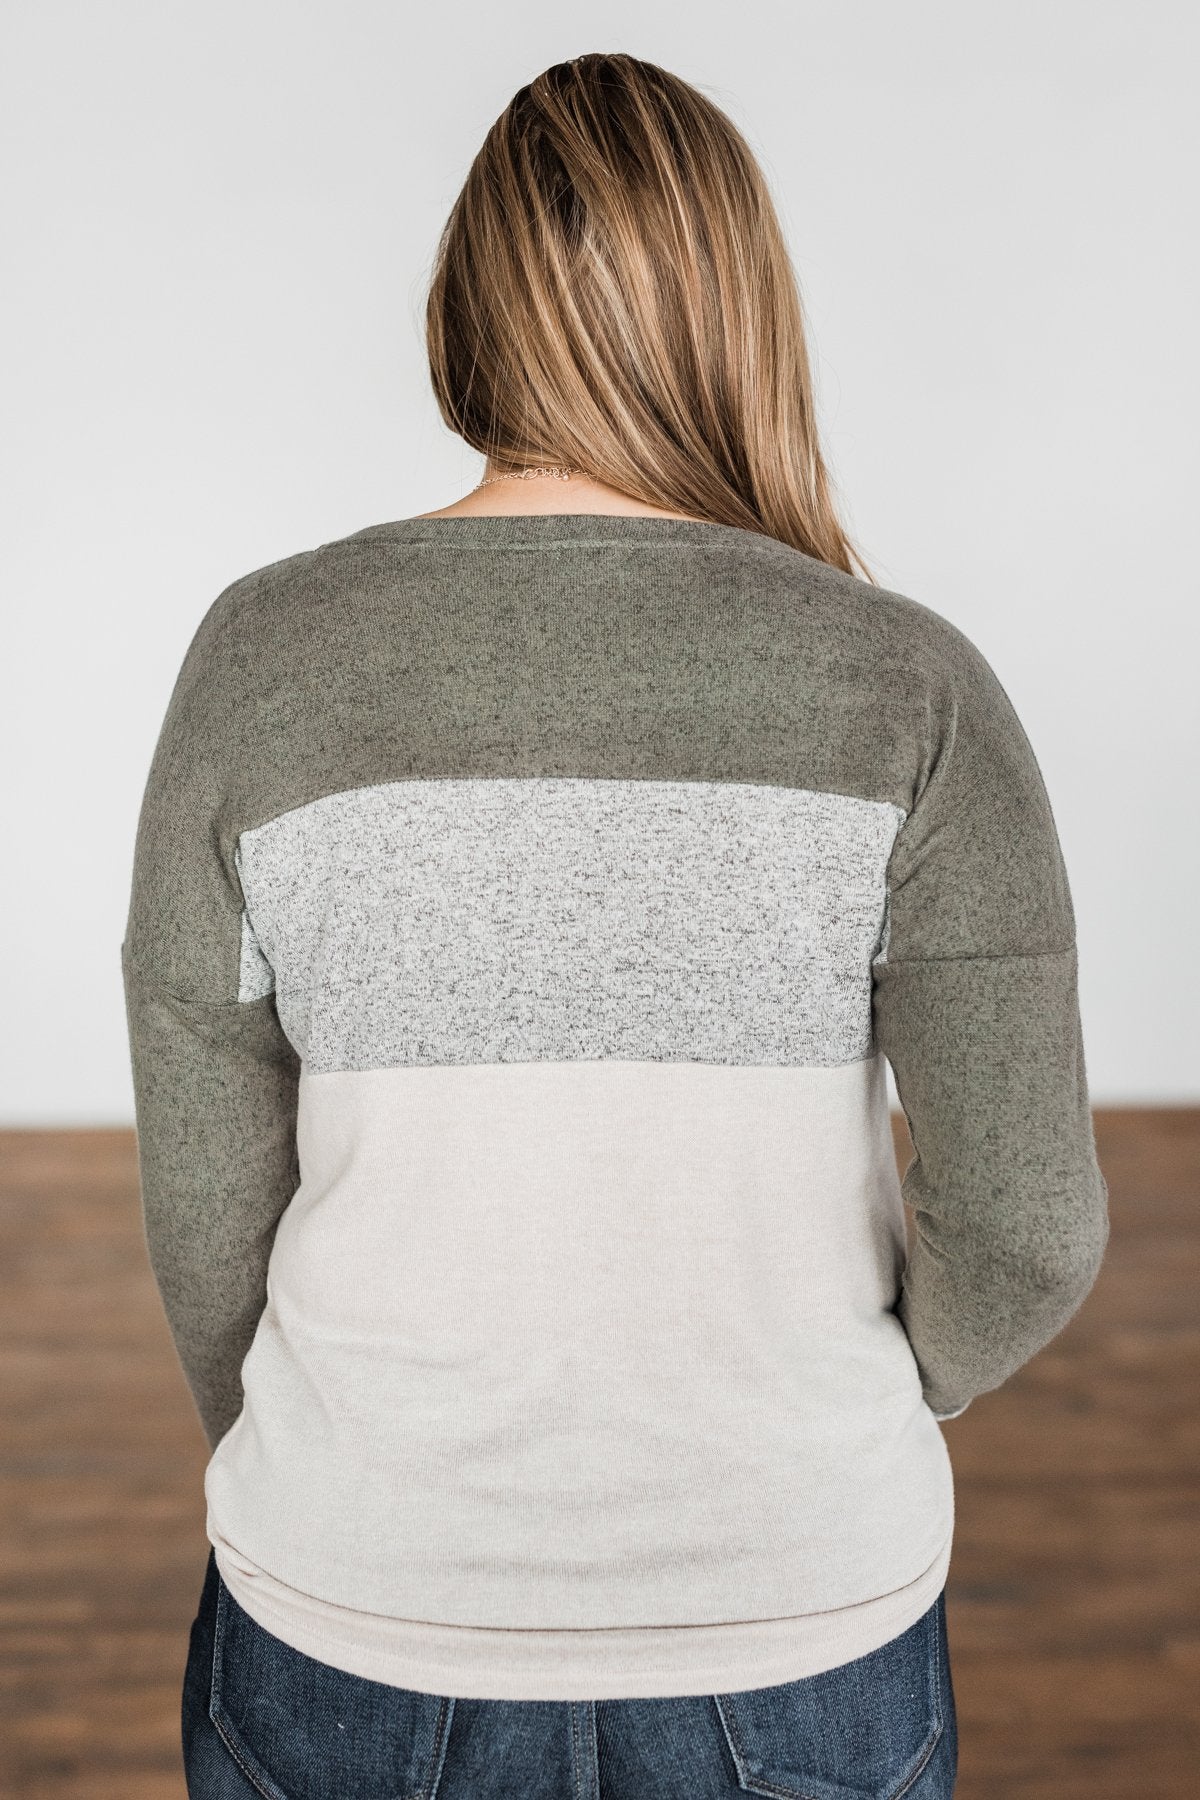 Fall Fever Color Block Top- Olive, Heather Grey, & Cream